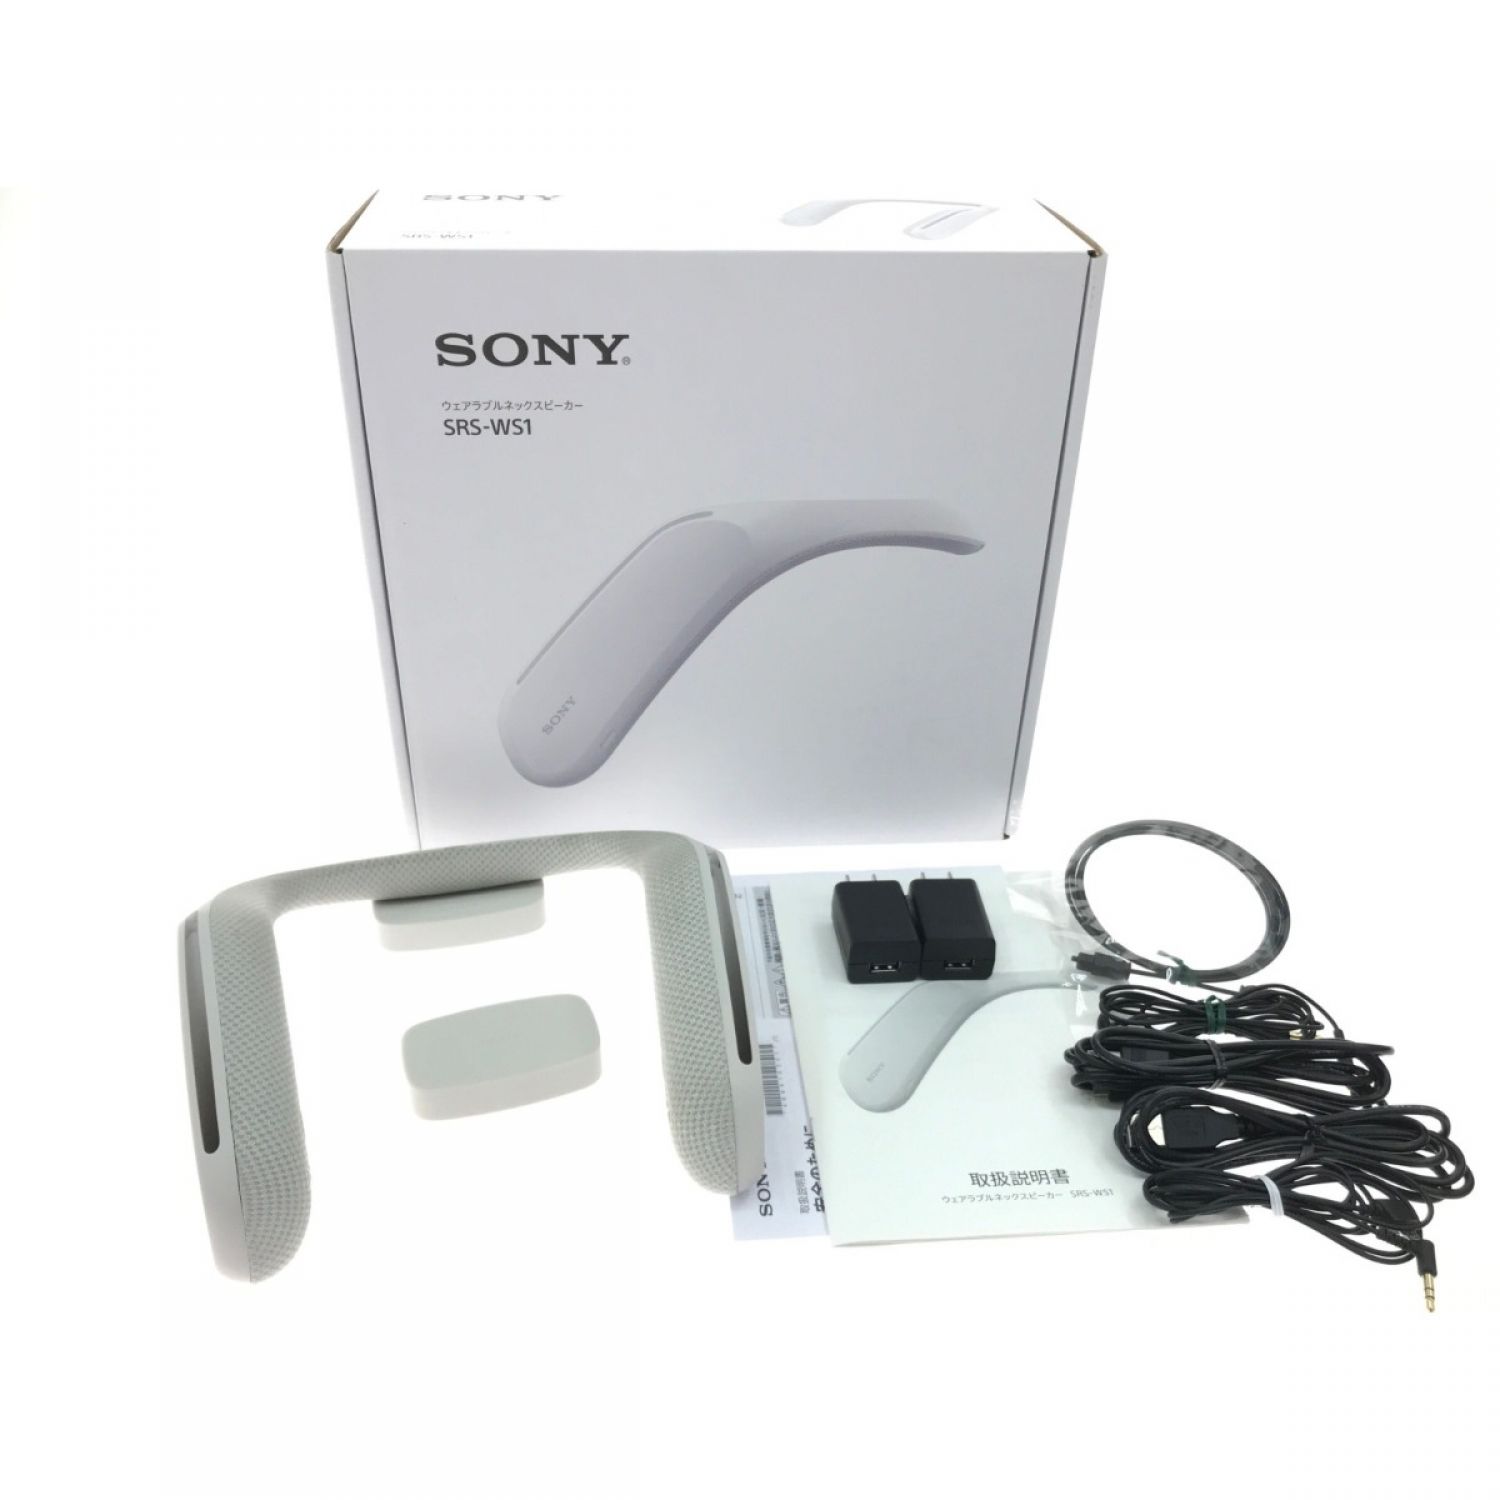 SONY SRS WS1 即日発送その他